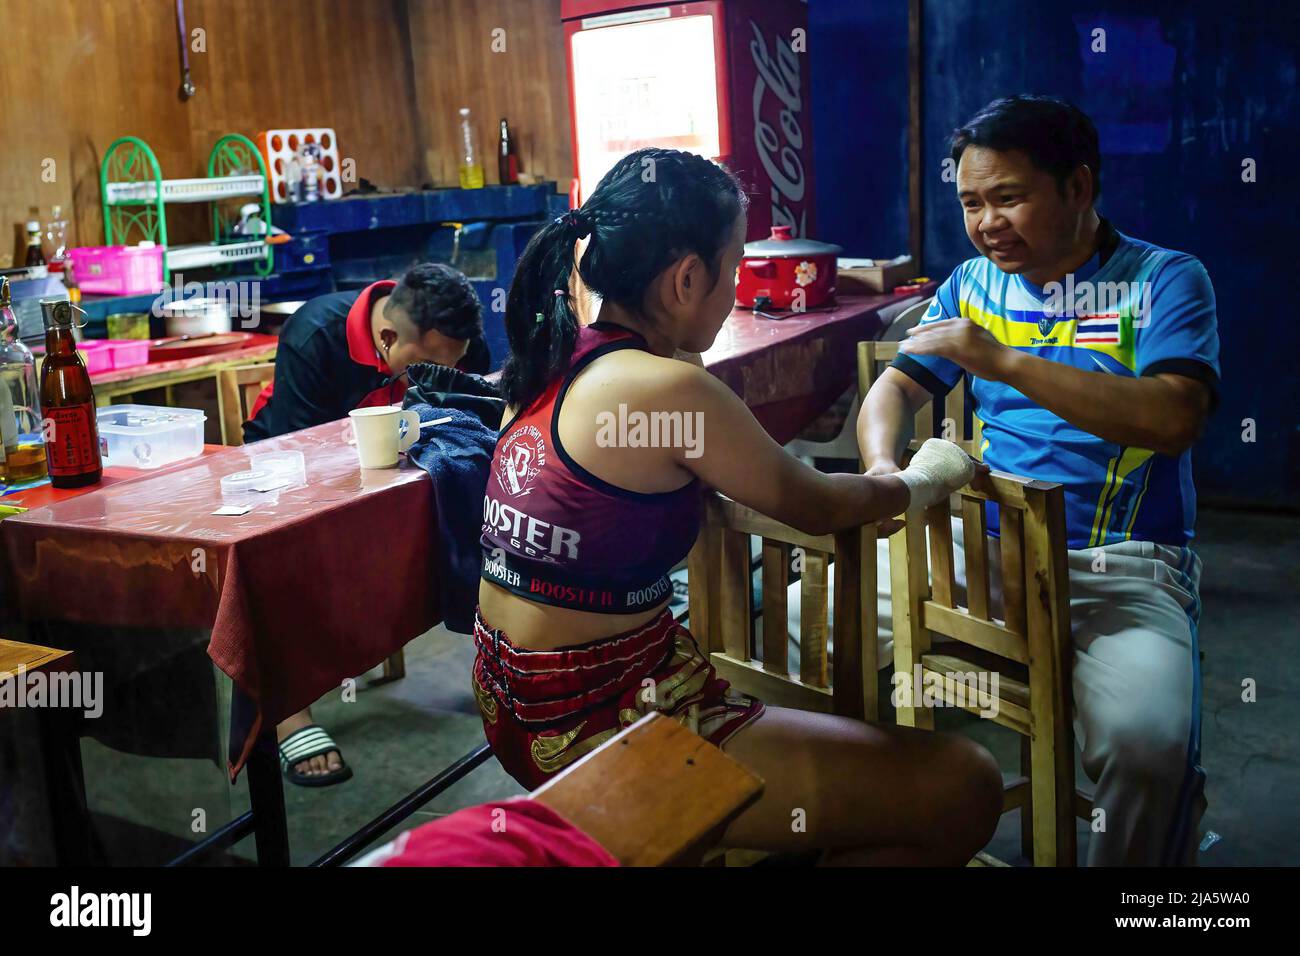 Kriswarakarn Srivichai (R) gives an indication to Naem Peaw (L) before her fight at the Thaphae International Boxing stadium. Years ago seeing women in a ring fighting (Muay Thai) in Thailand was almost unheard of, unless it was in a ceremonial fight in the local temple during the festive season. Nowadays, things are changing and more women are joining the sport. The city of Chiang Mai is the epicentre of this change with the support of a local promoter that sees the sport as a way to promote equality, and the growing interest in the sport by foreigners flocking into the city.  In some Muay Th Stock Photo